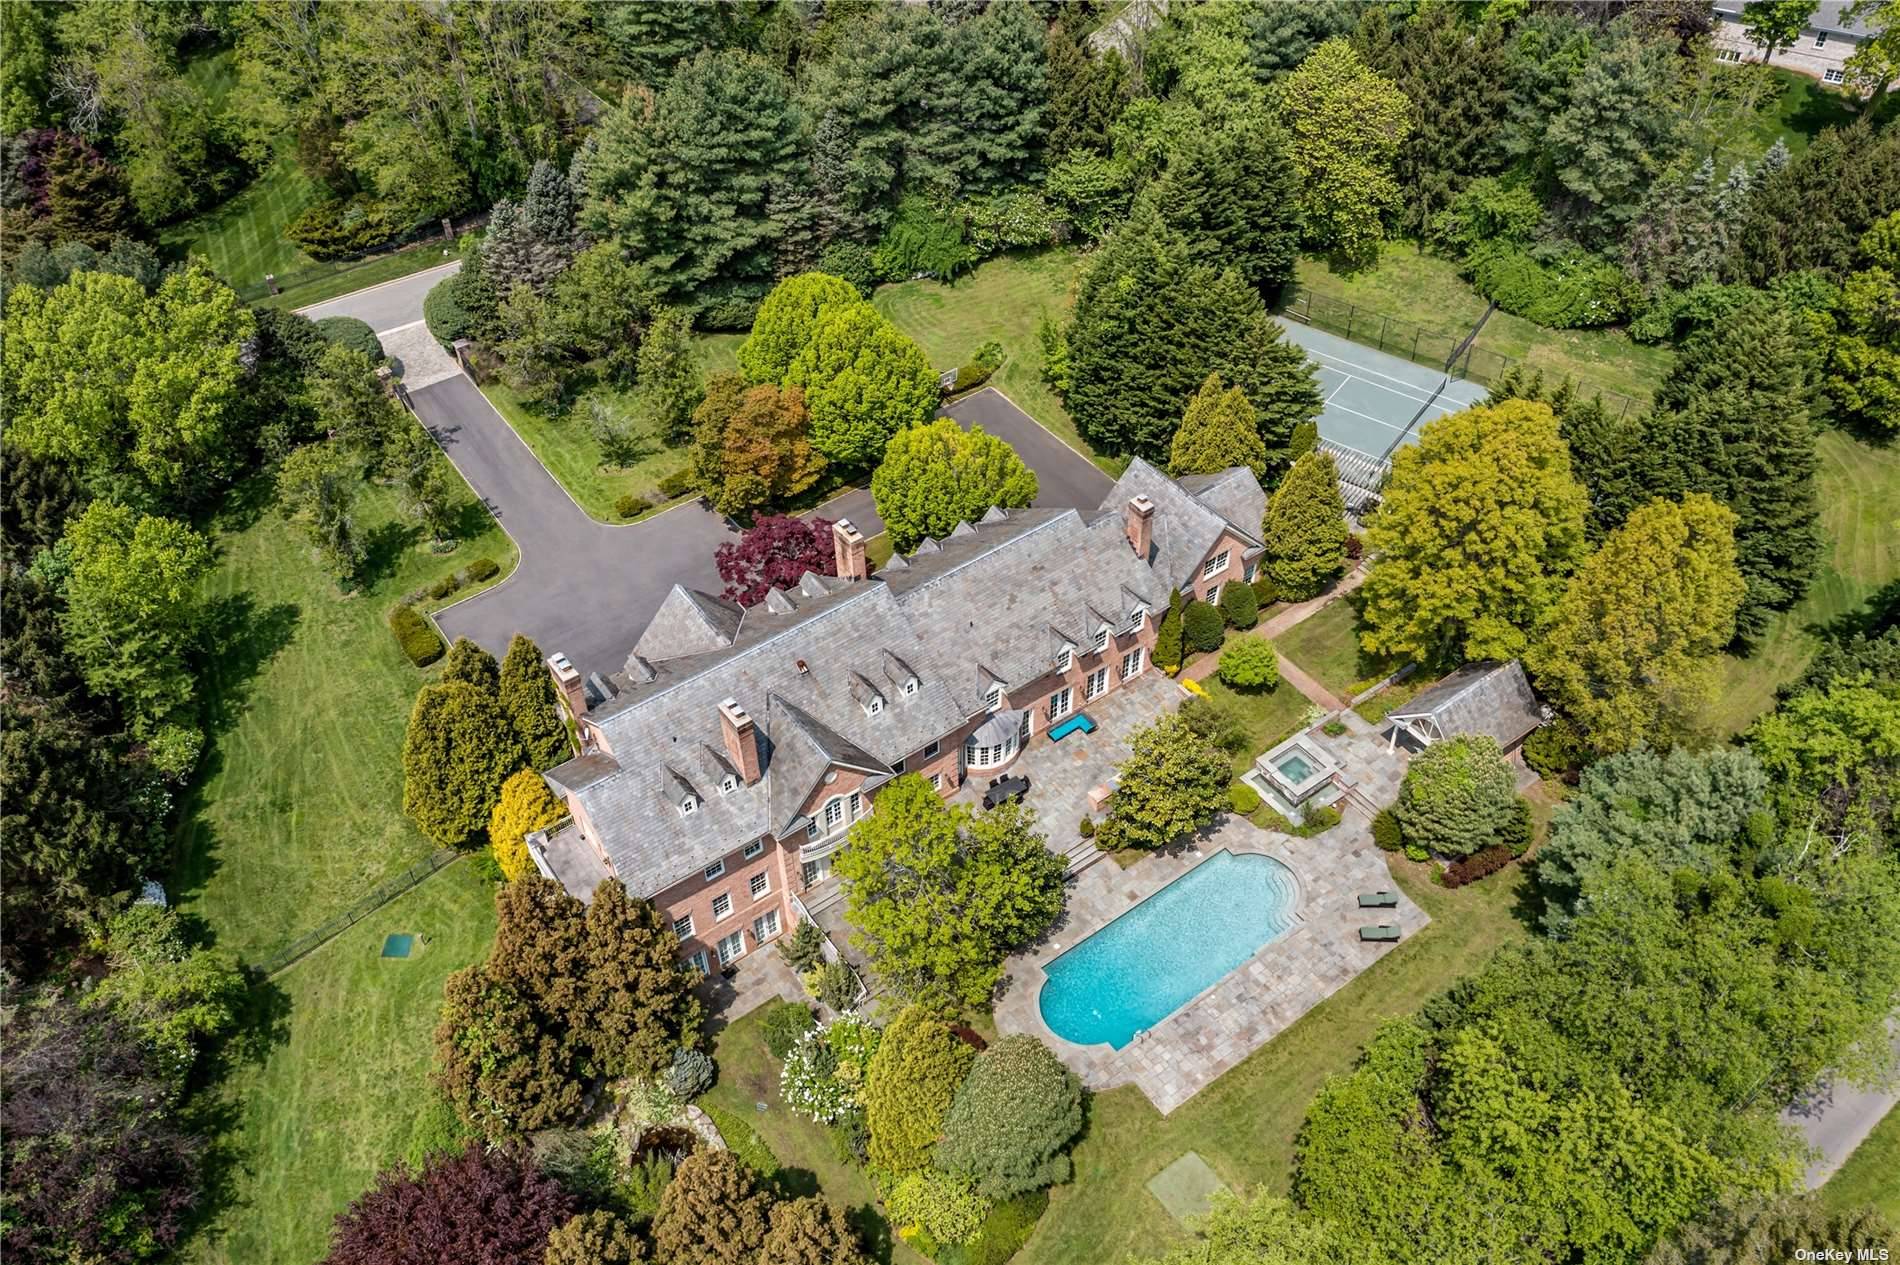 A 10, 000 Sq. Ft. Brick Estate, located in the Heart of Old Westbury, NY.